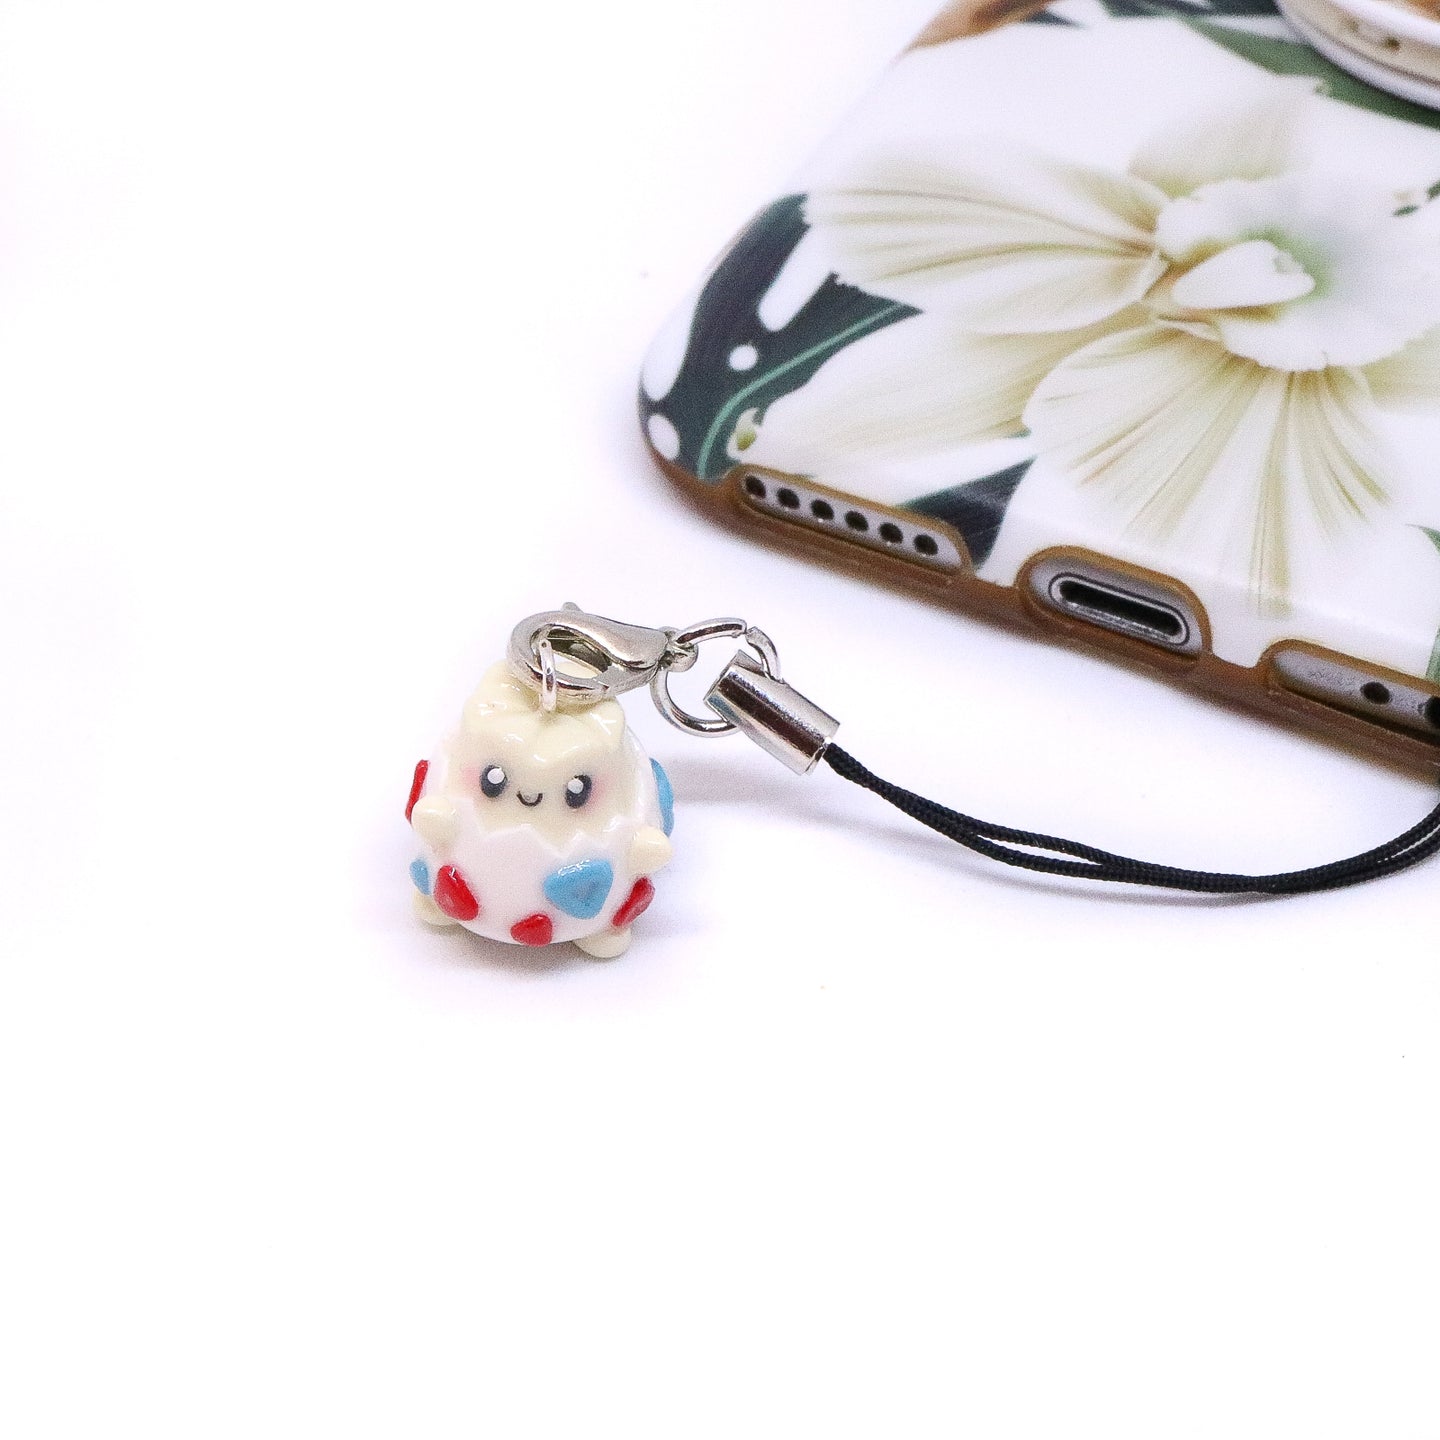 Egg Creature with Red and Blue Markings Polymer Clay Charm